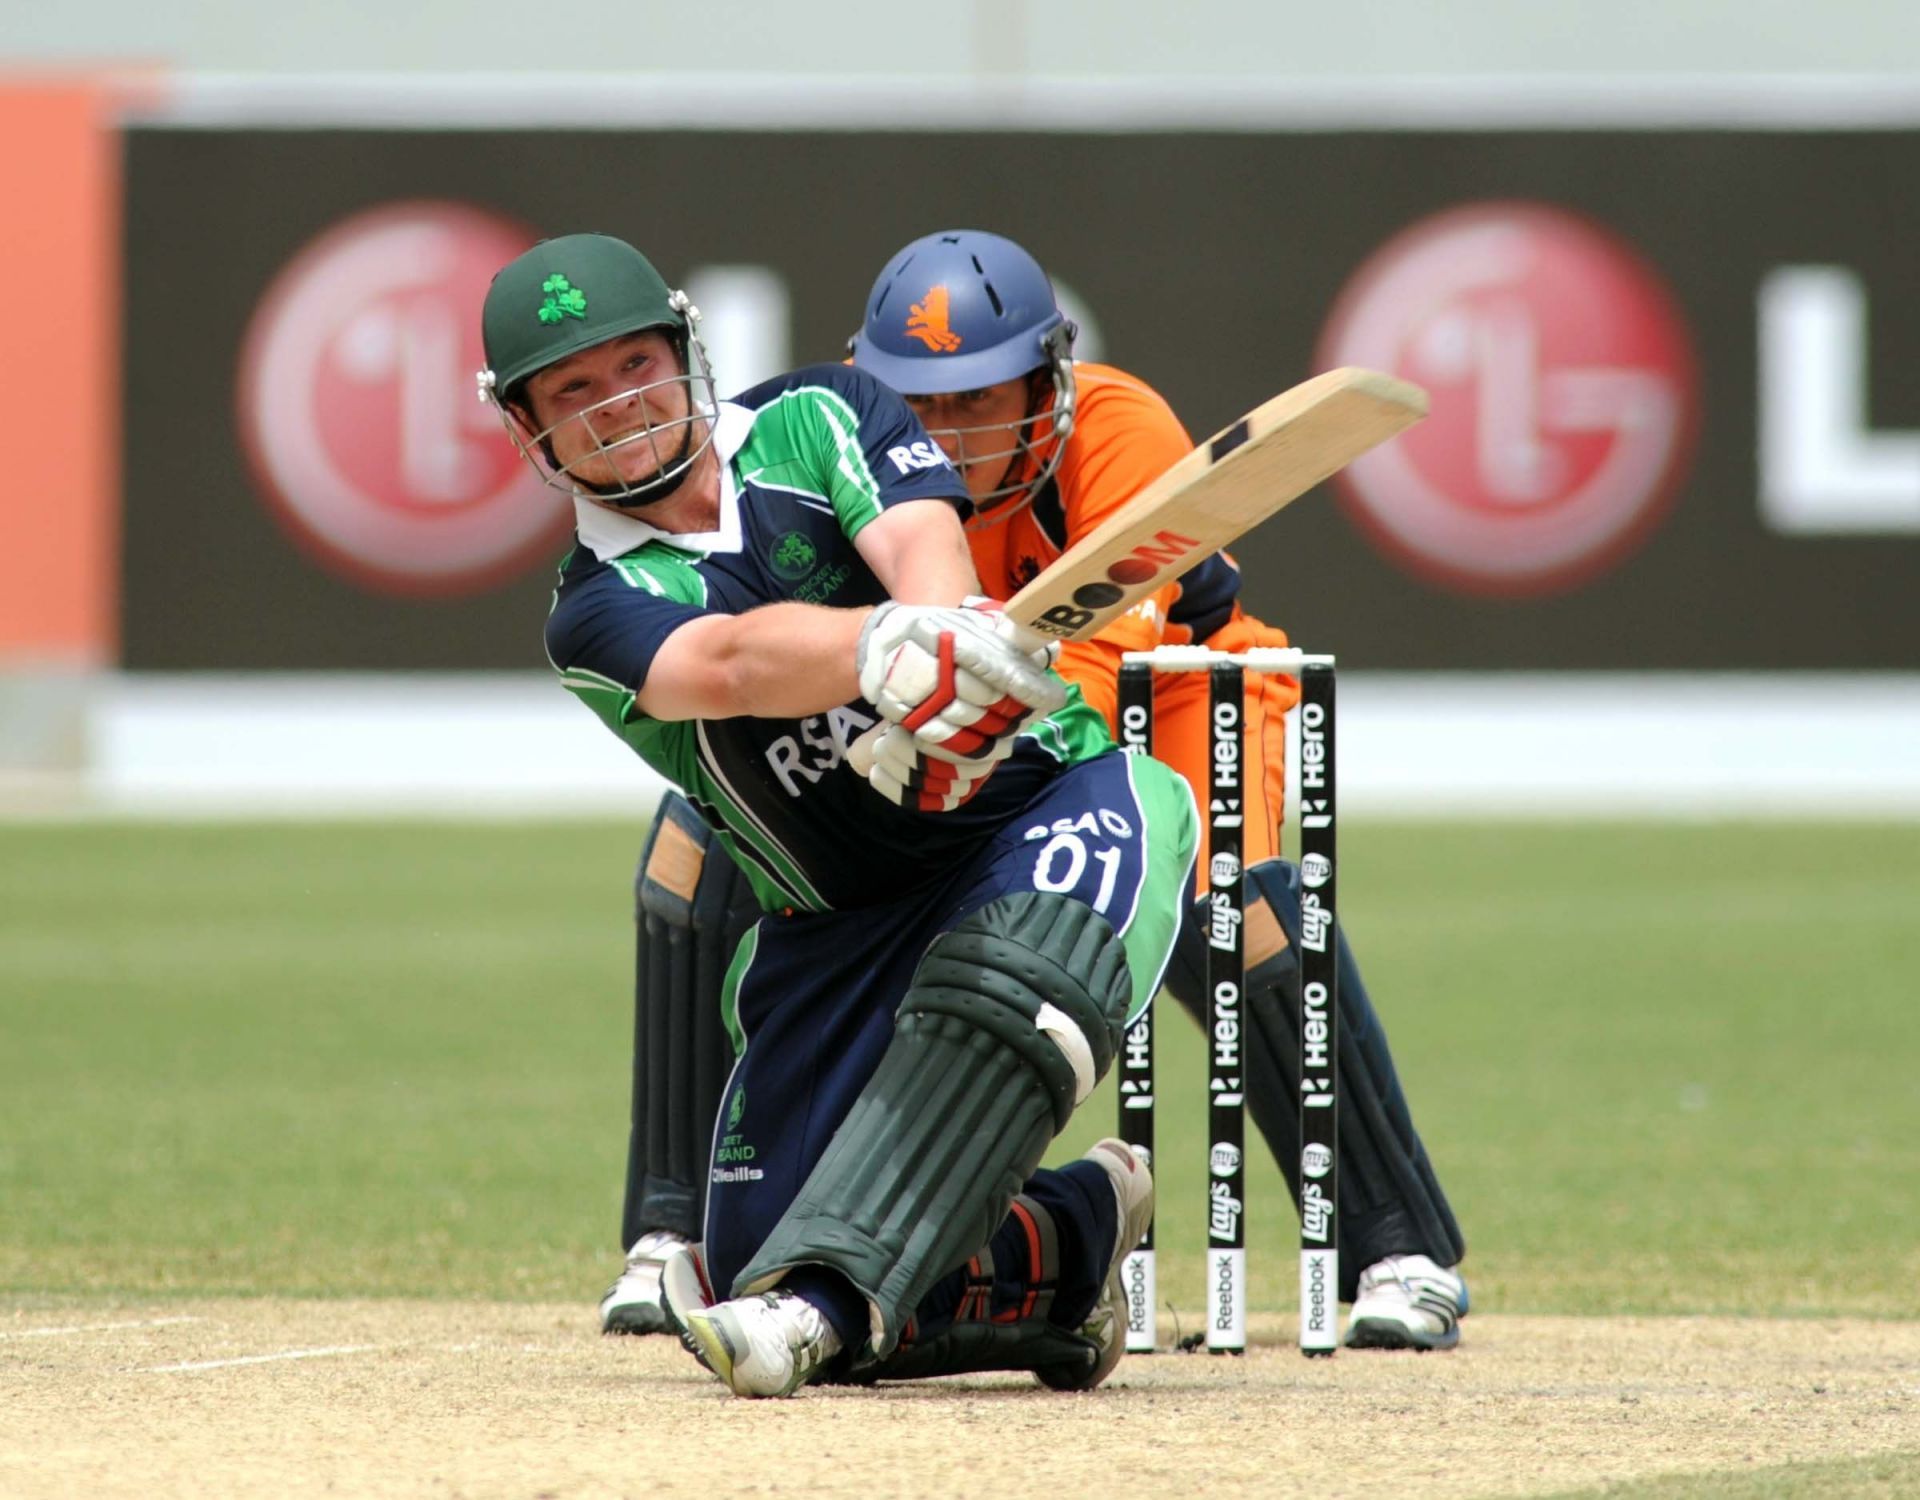 Ireland will cross swords with the Netherlands today in ICC T20 World Cup 2021